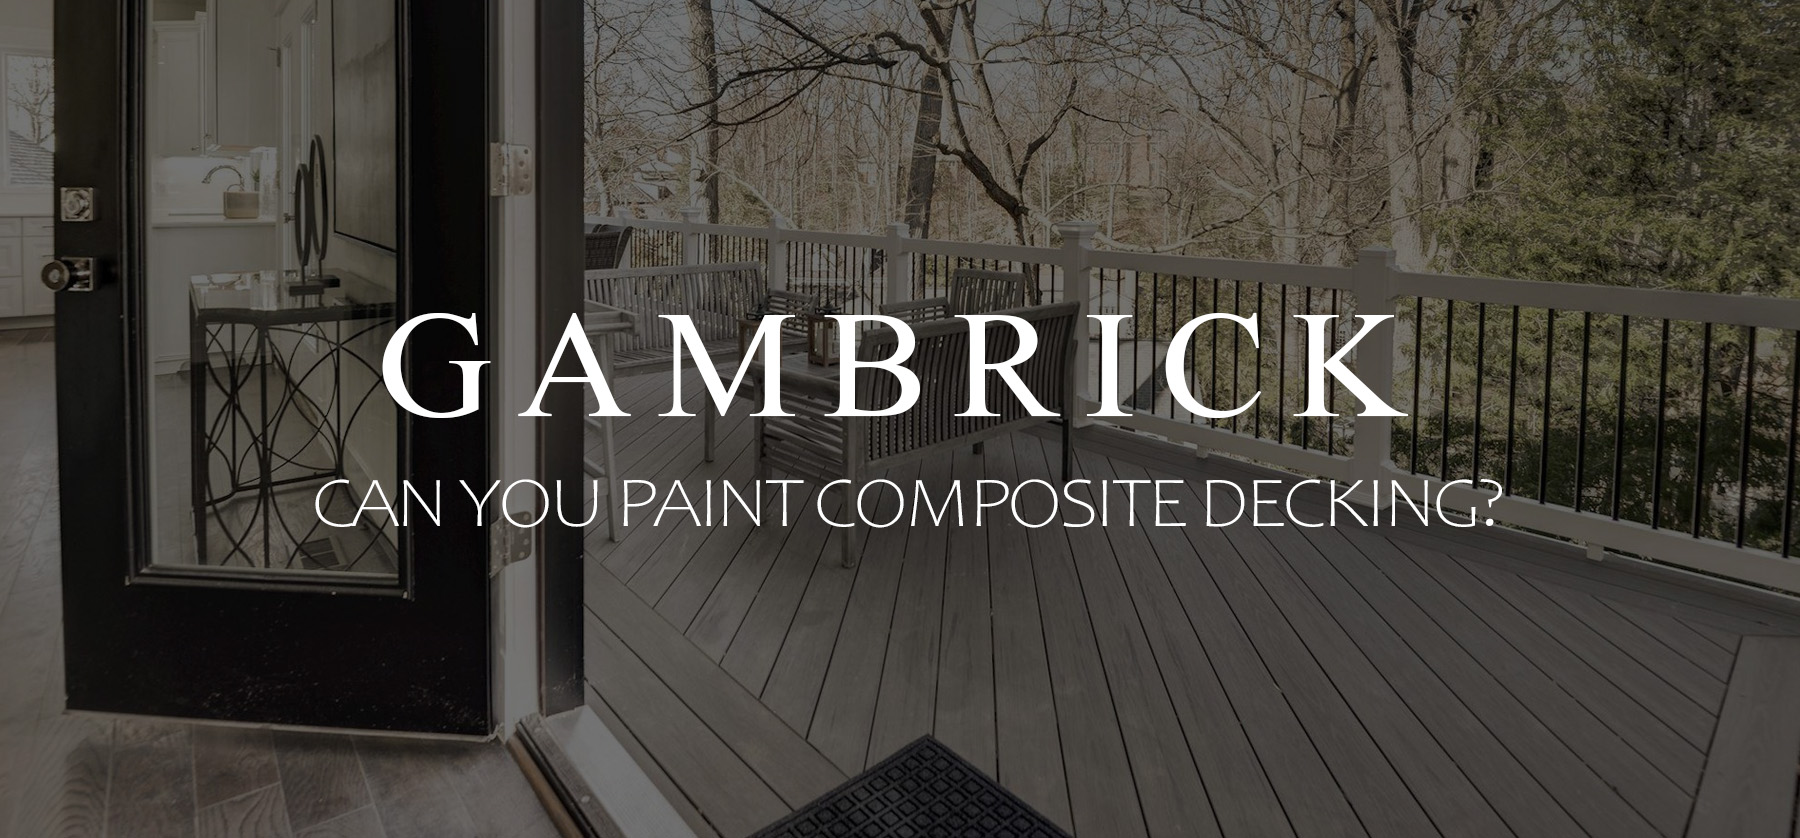 can you paint composite decking banner